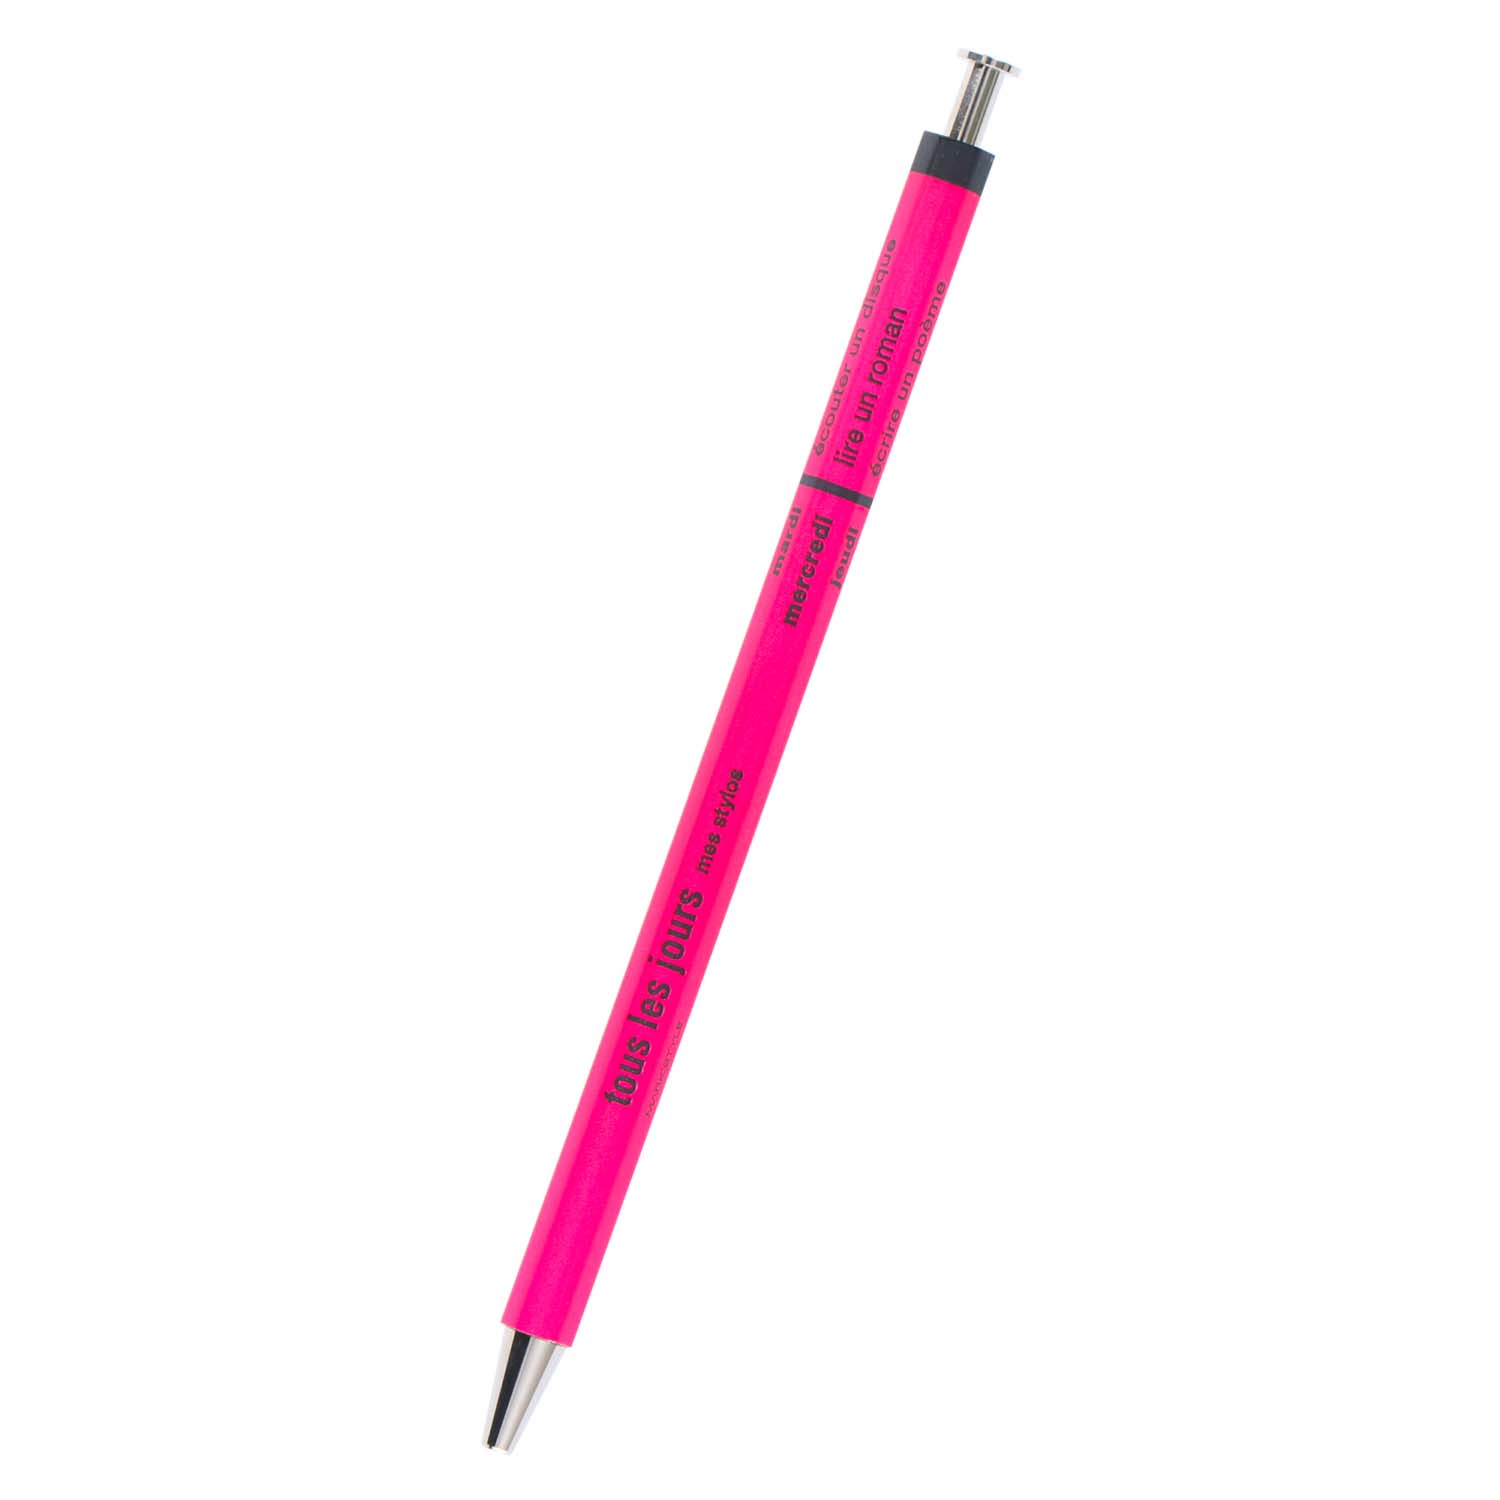 Days Mark's Mechanical Pencil with Eraser DAY-SH2-TQ Turquoise